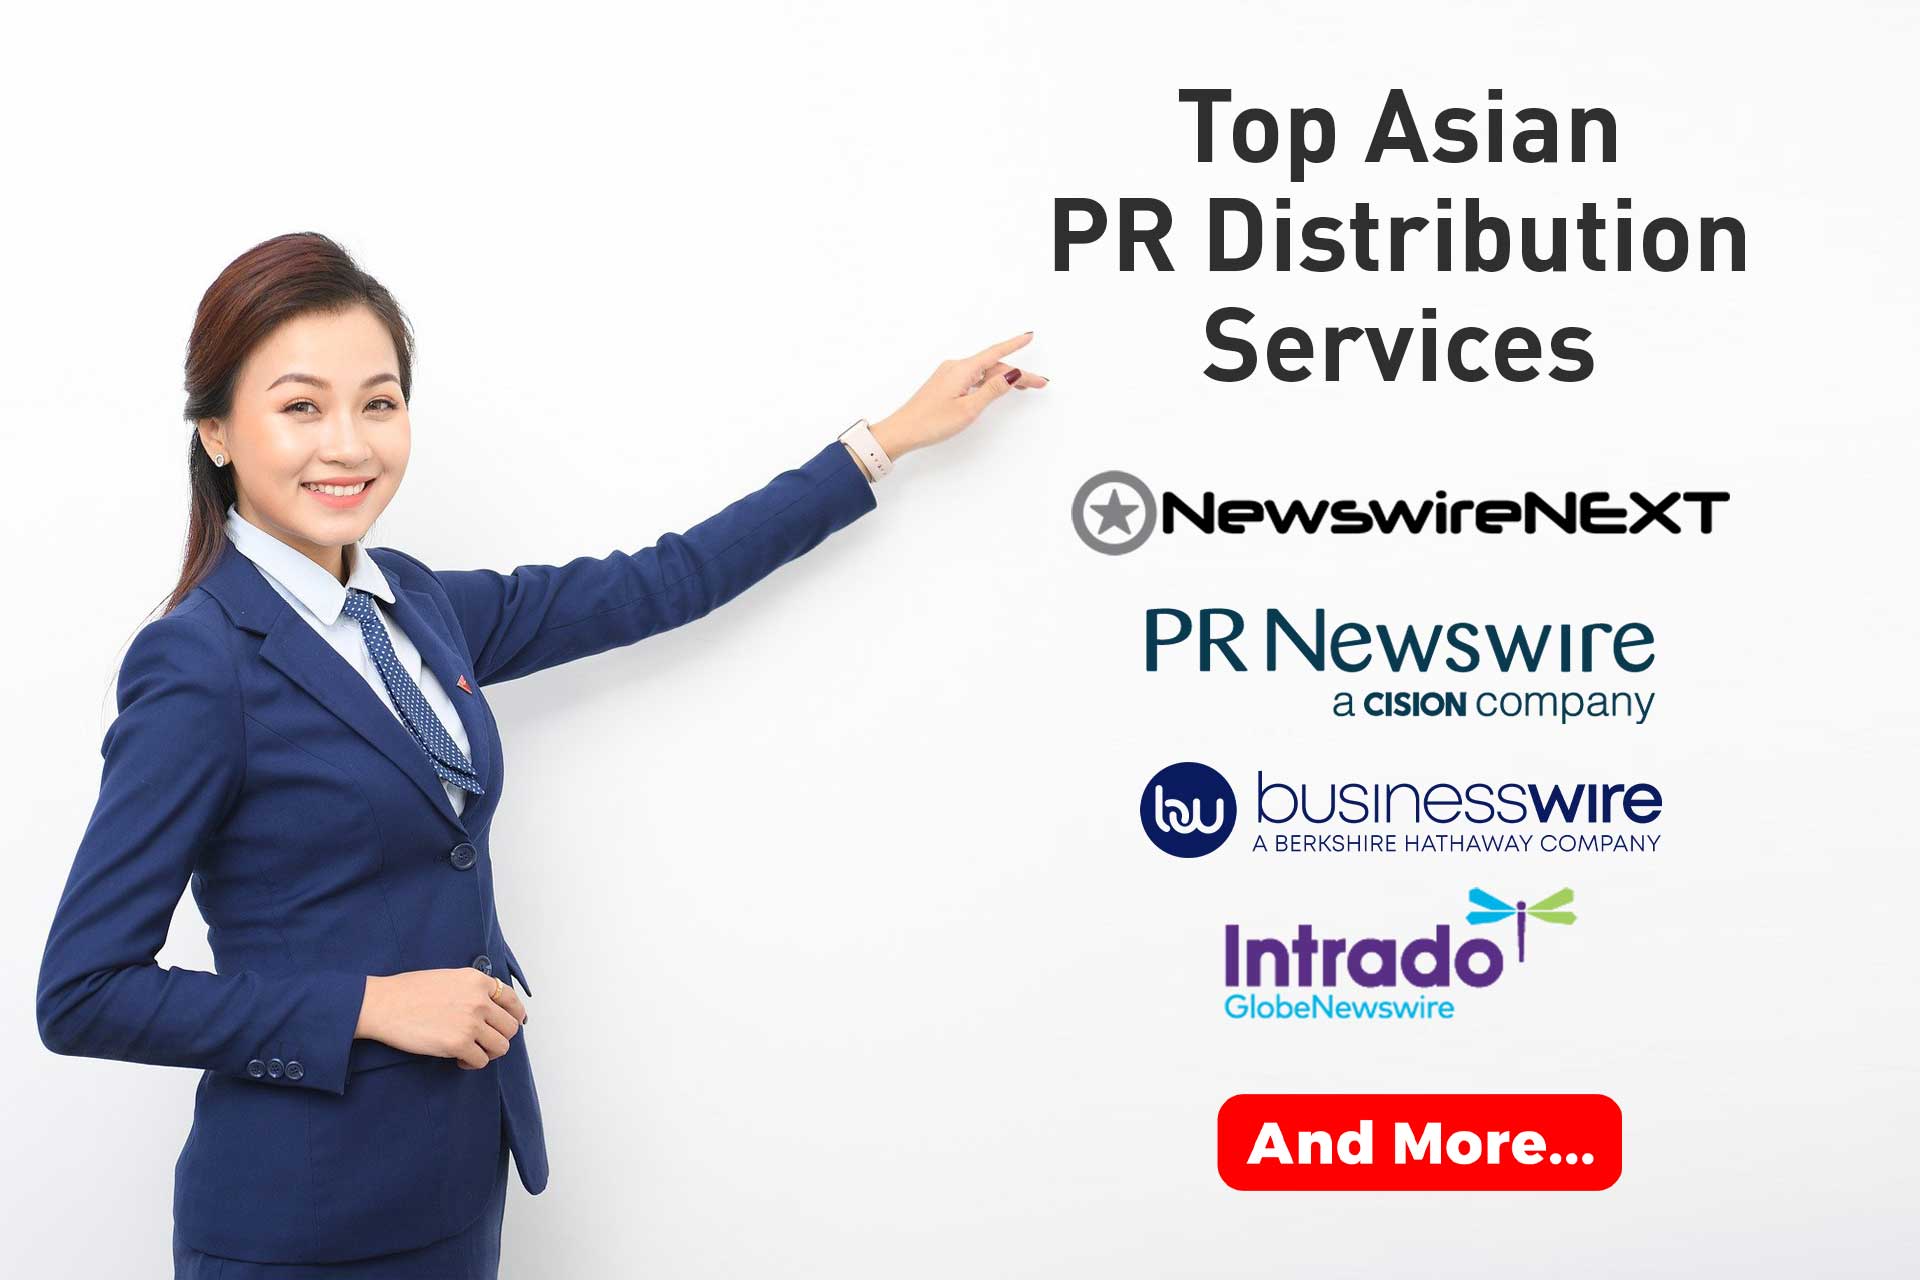 Top 7 Asia Press Release Services Reviewed